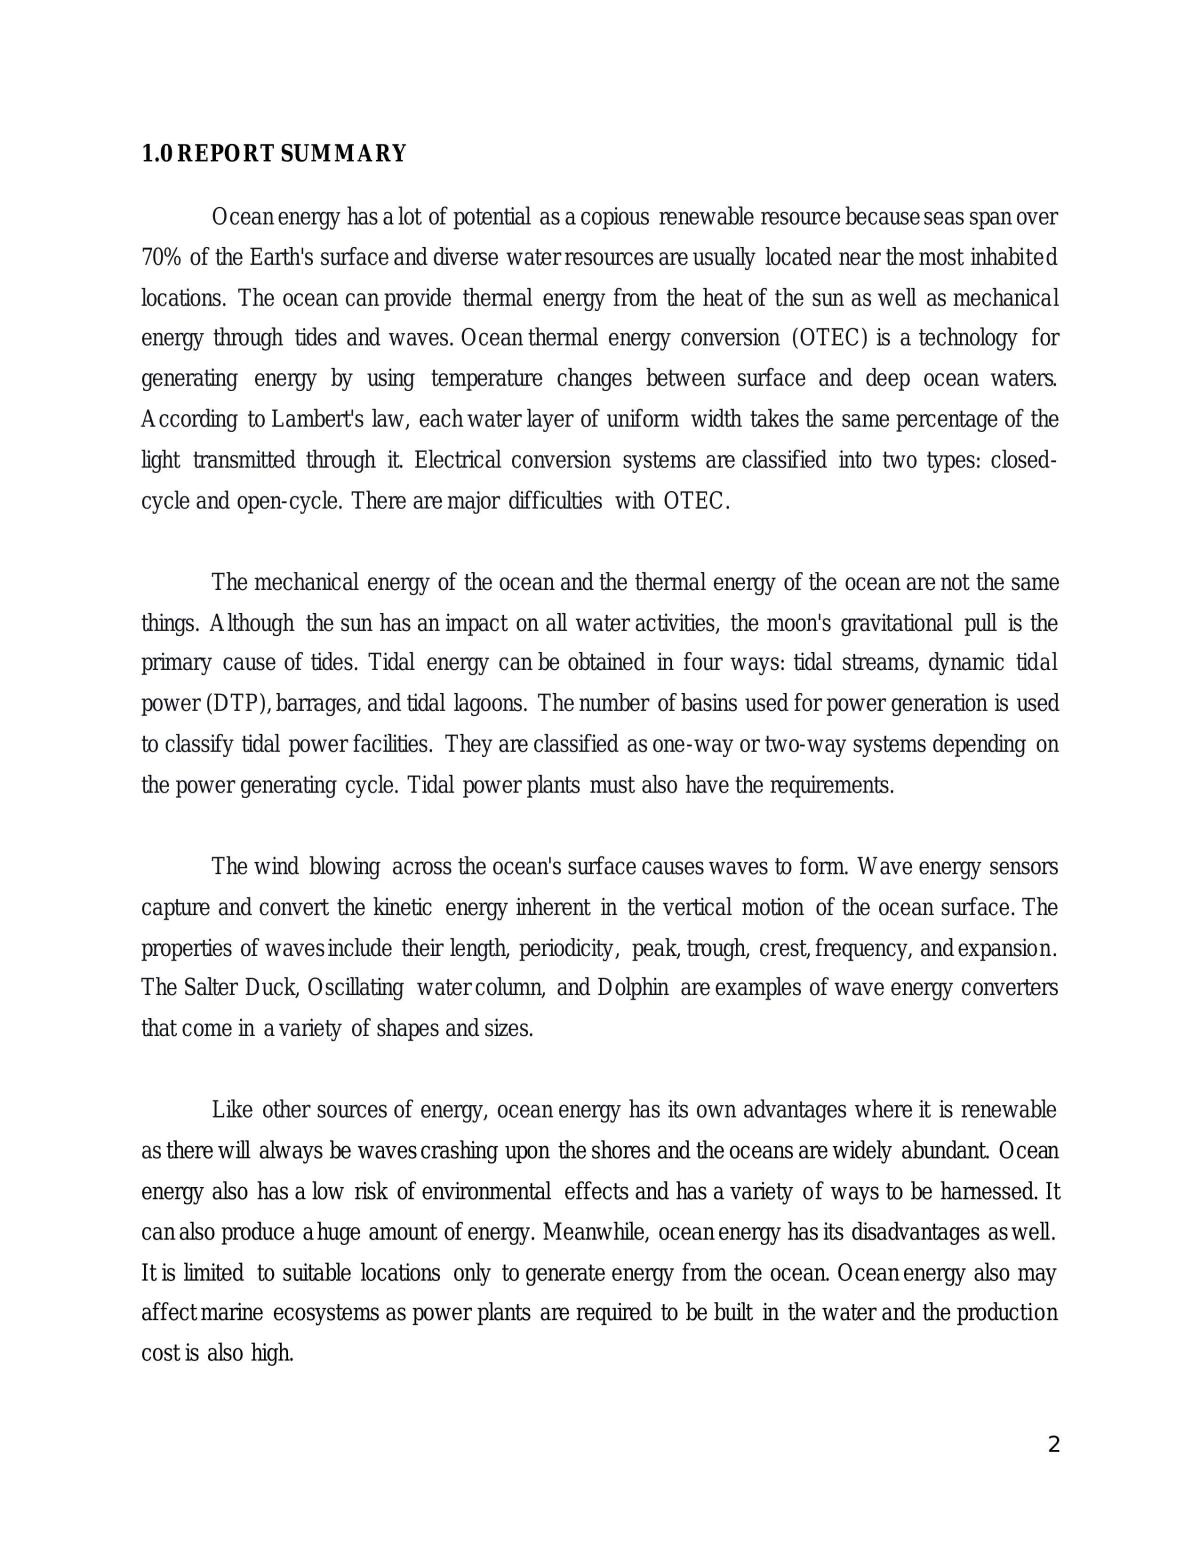 Energy from Ocean - Page 1